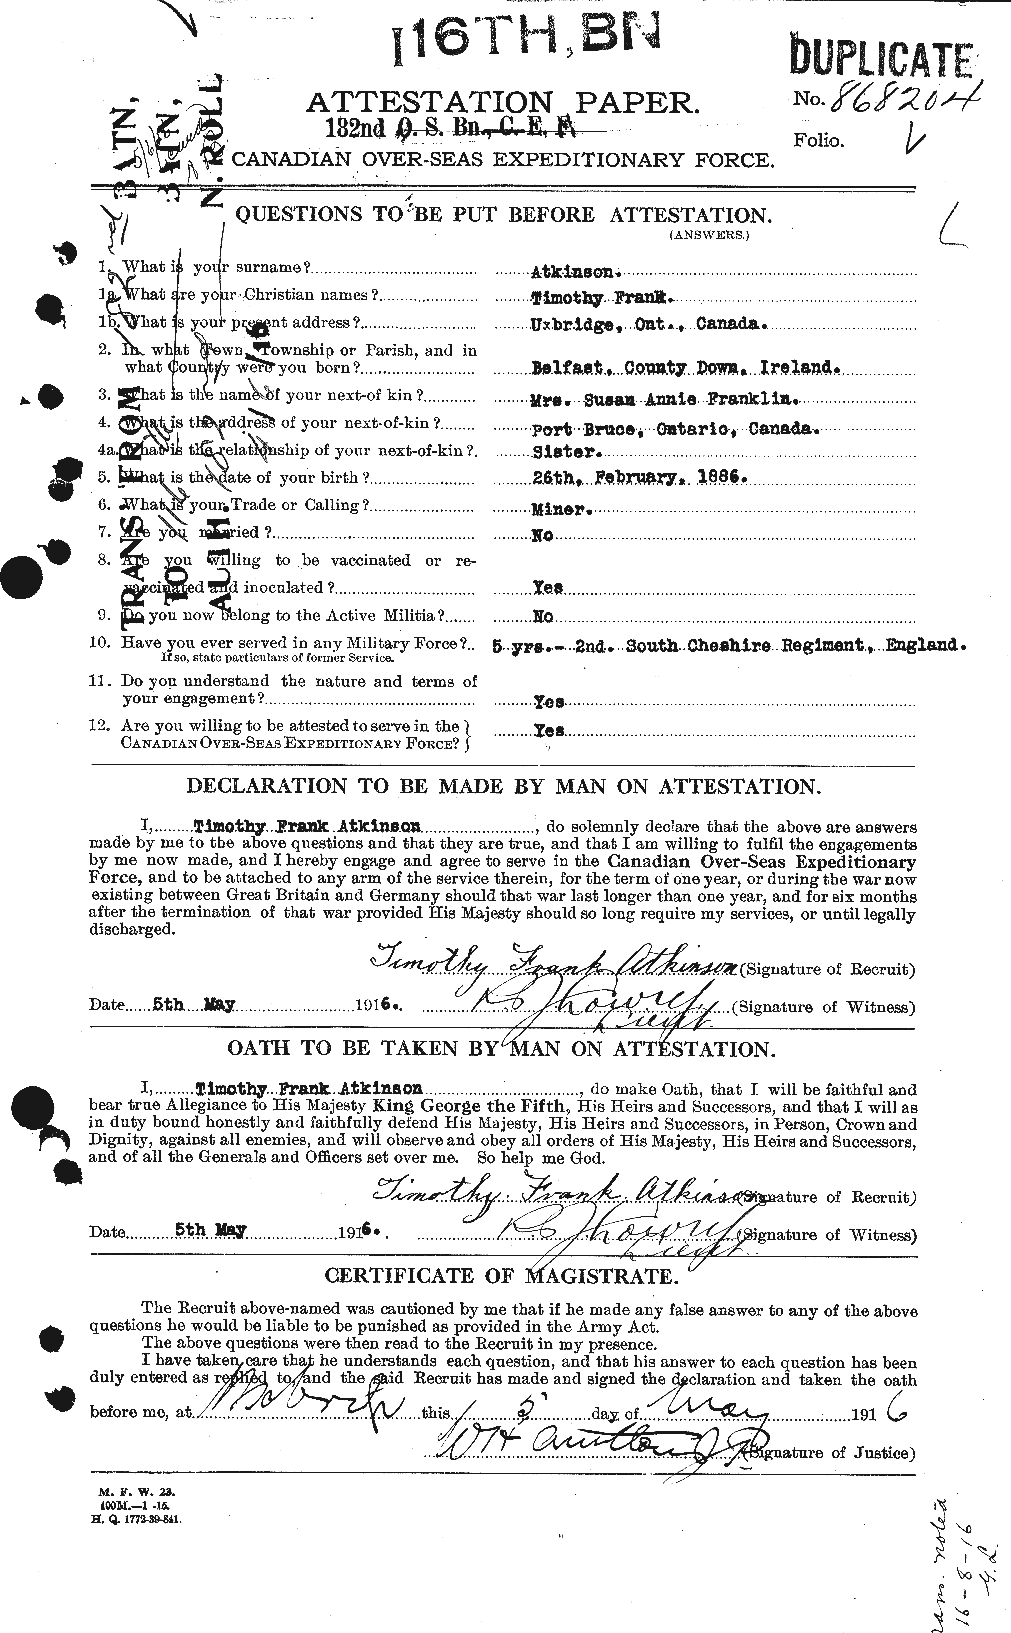 Personnel Records of the First World War - CEF 217204a